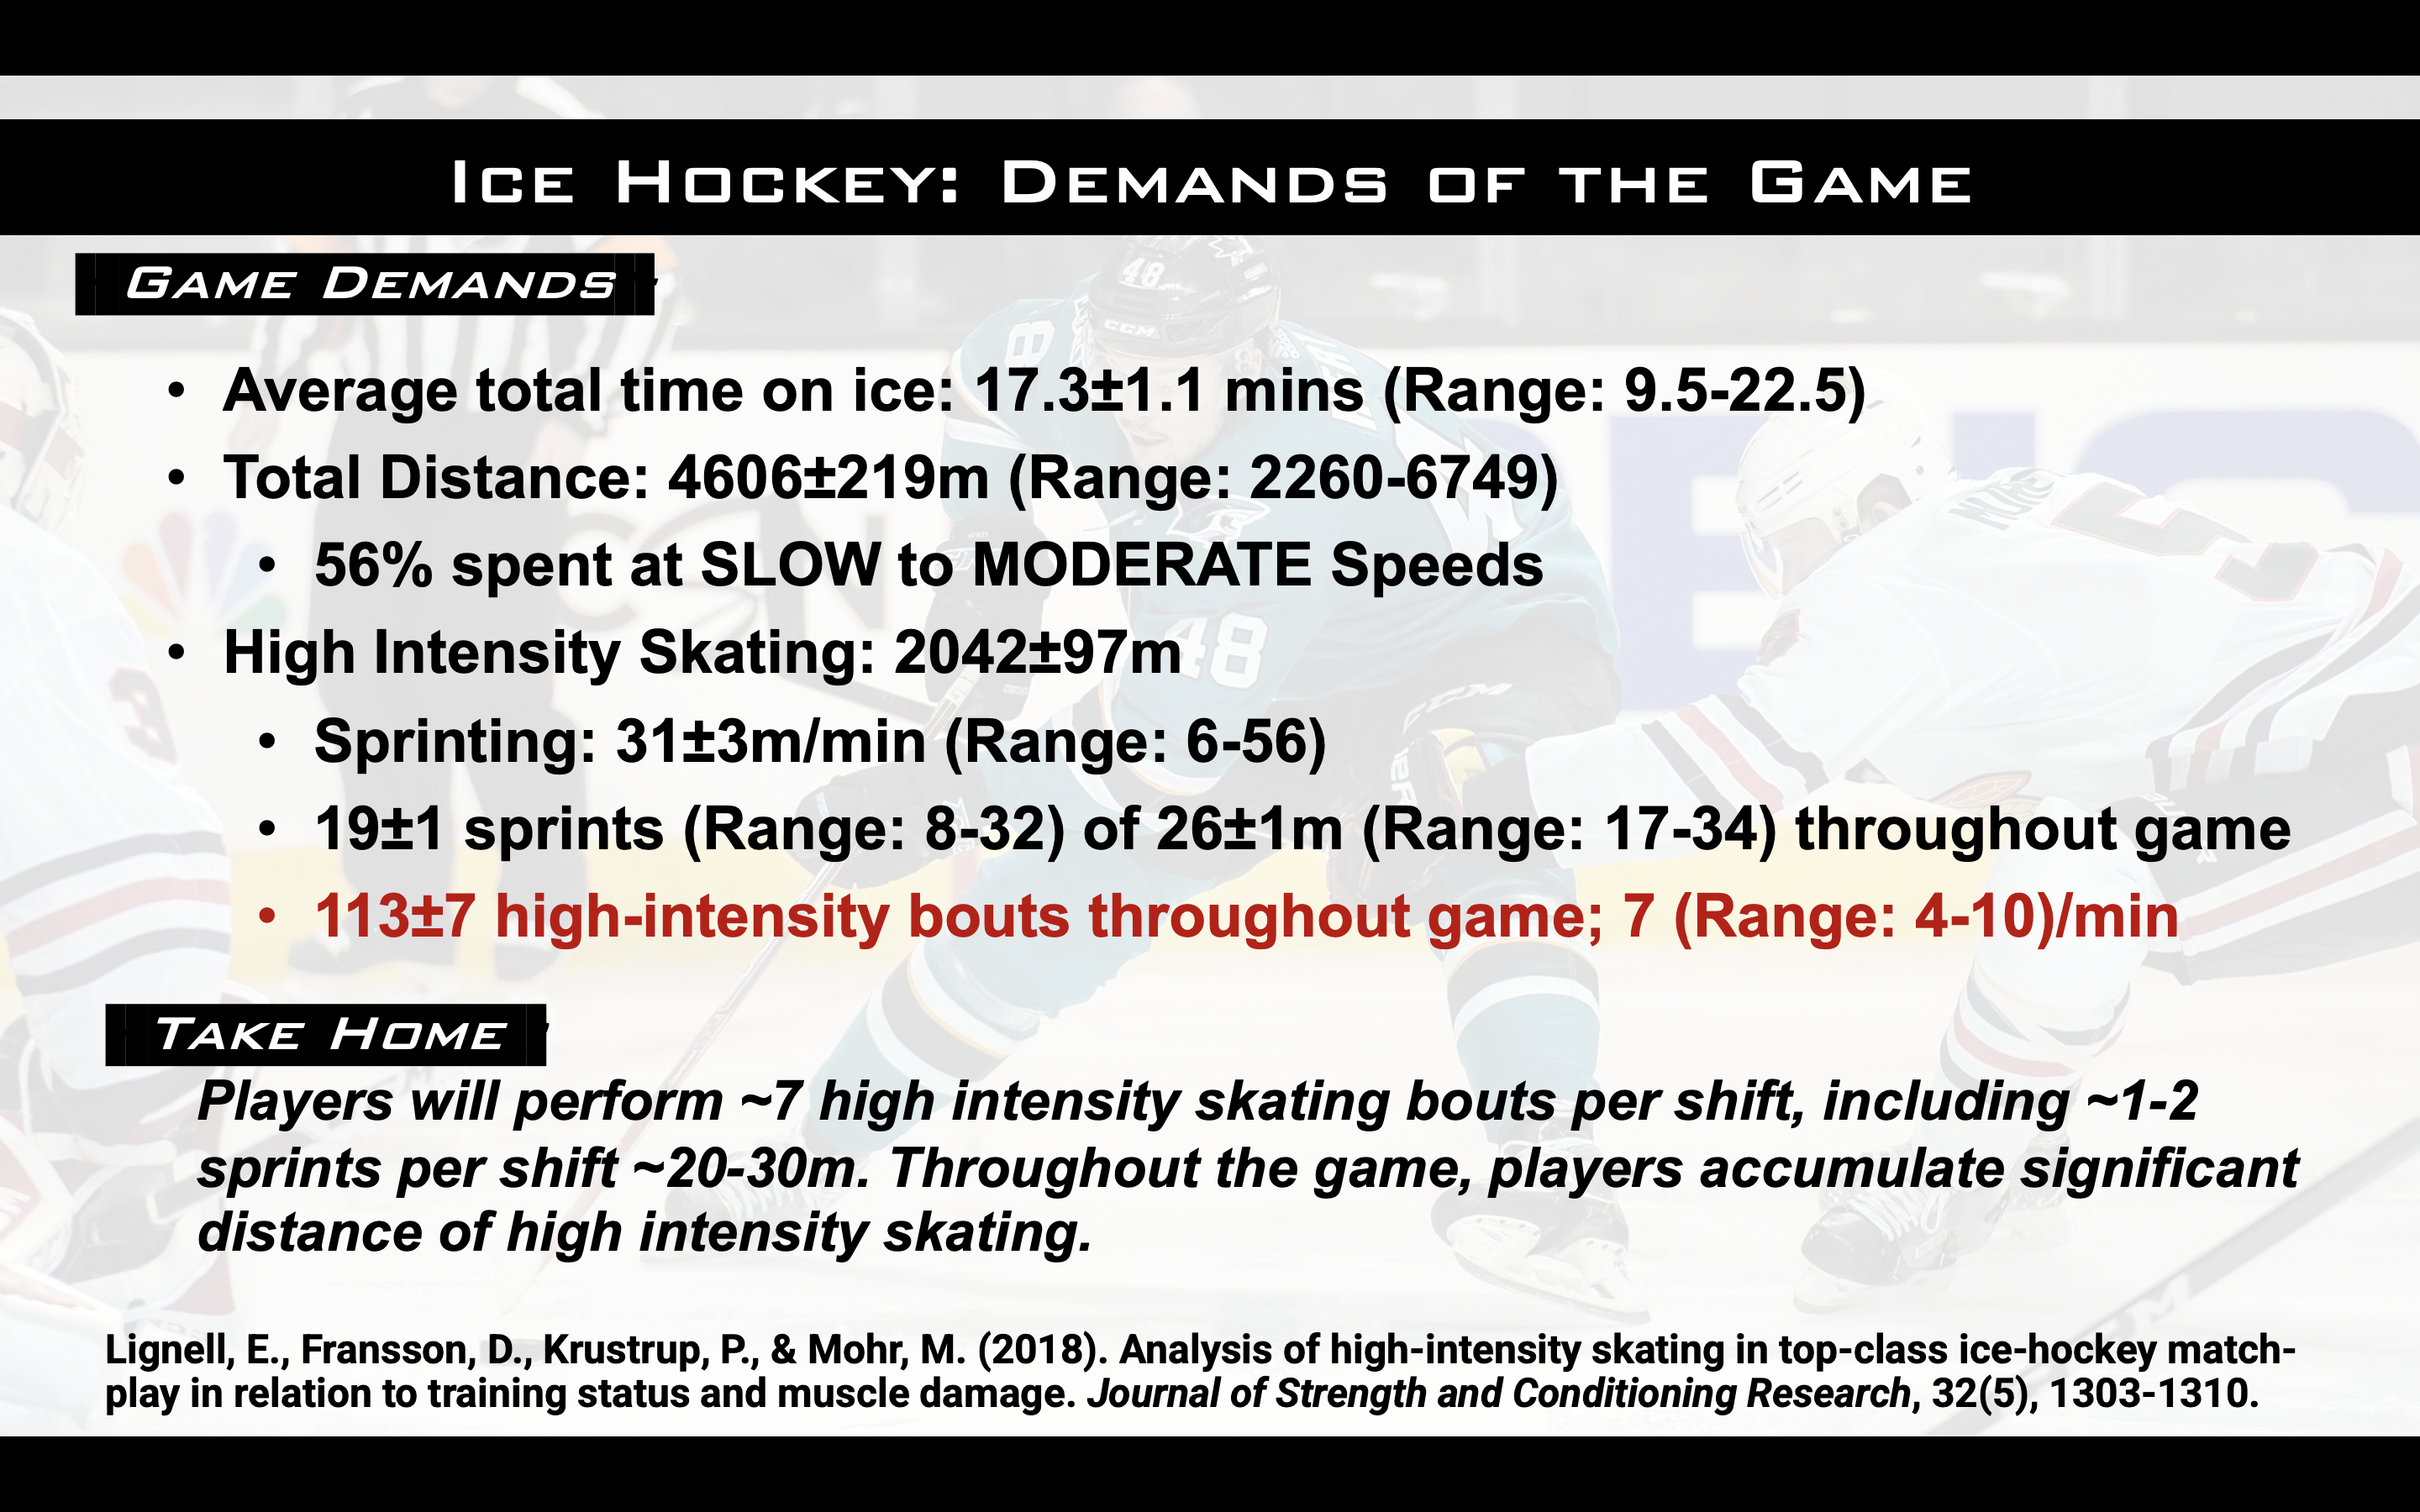 Analyzing Game Demands of Ice Hockey: Sprinting Emphasis